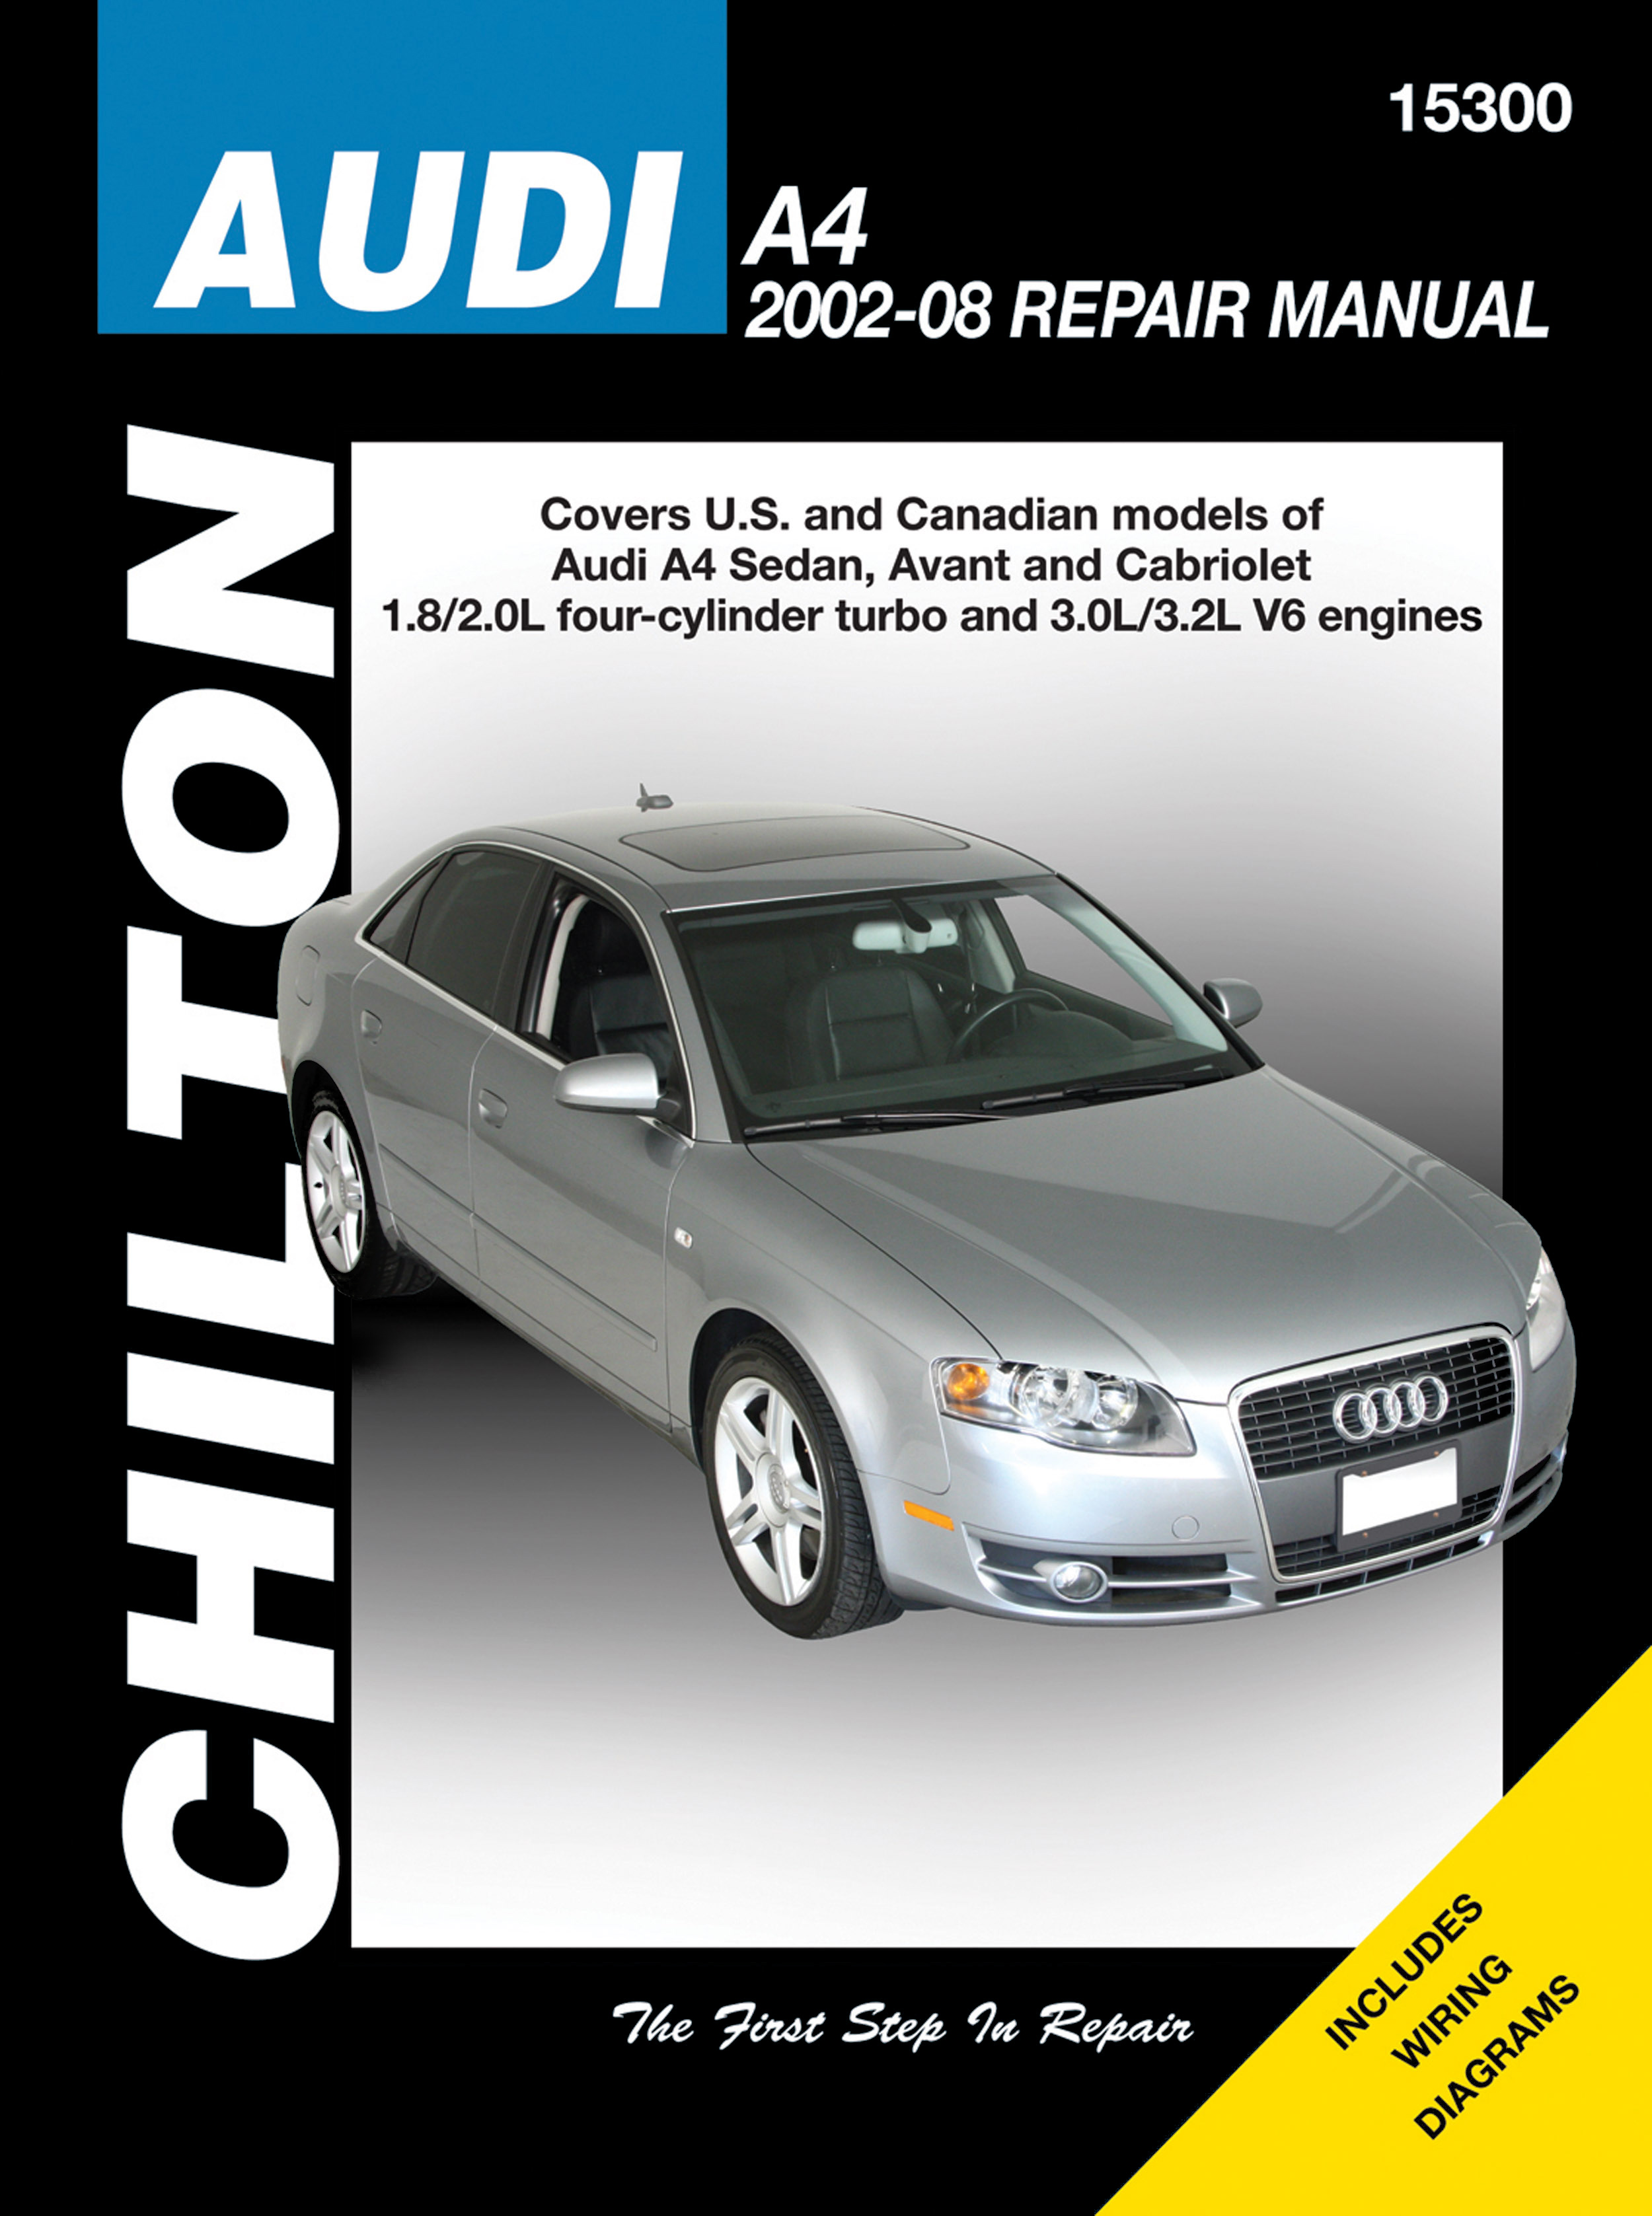 Audi A4 US/Canadian models Audi A4 Sedan, Avant & Cabriolet (2002-08) (Does not include diesel, S4 or RS4 model information) Chilton Repair Man...